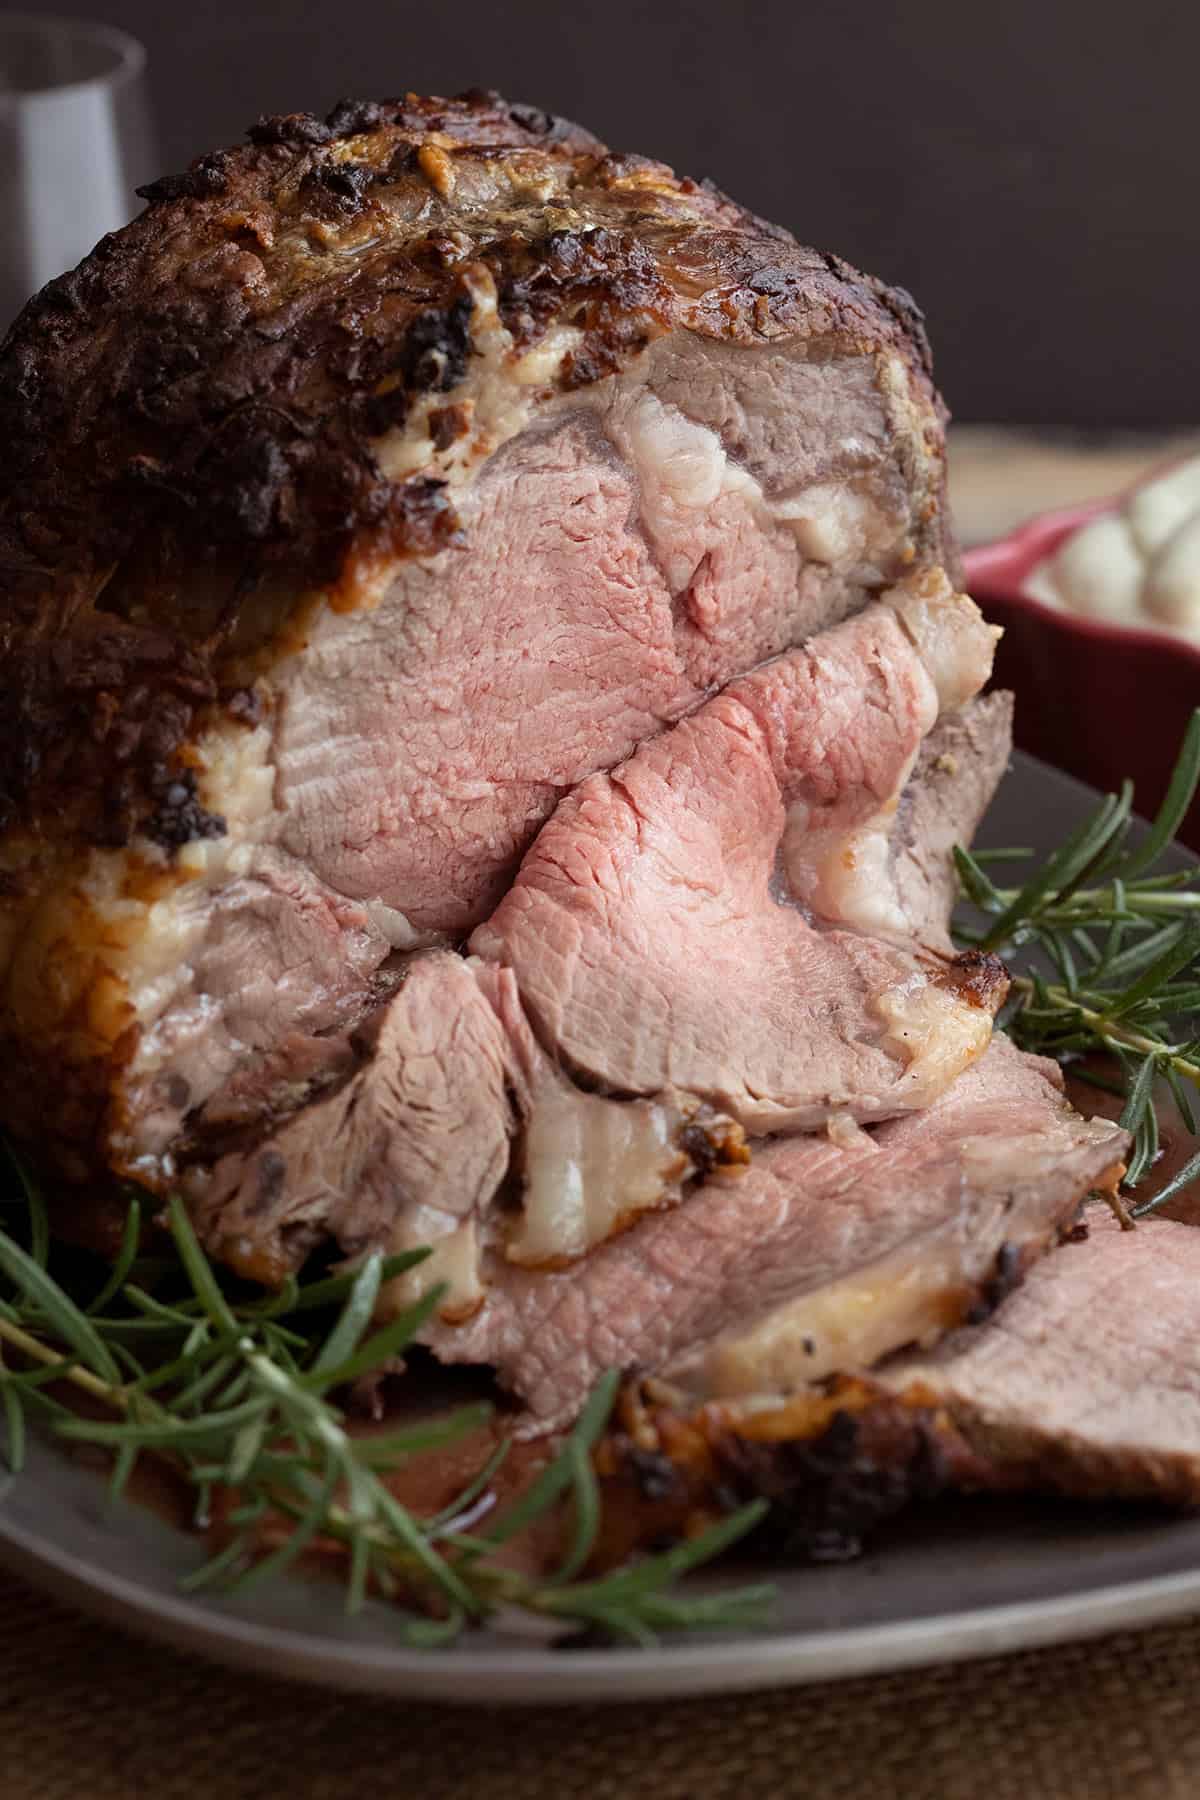 Herb-Crusted Prime Rib Recipe: How to Make It